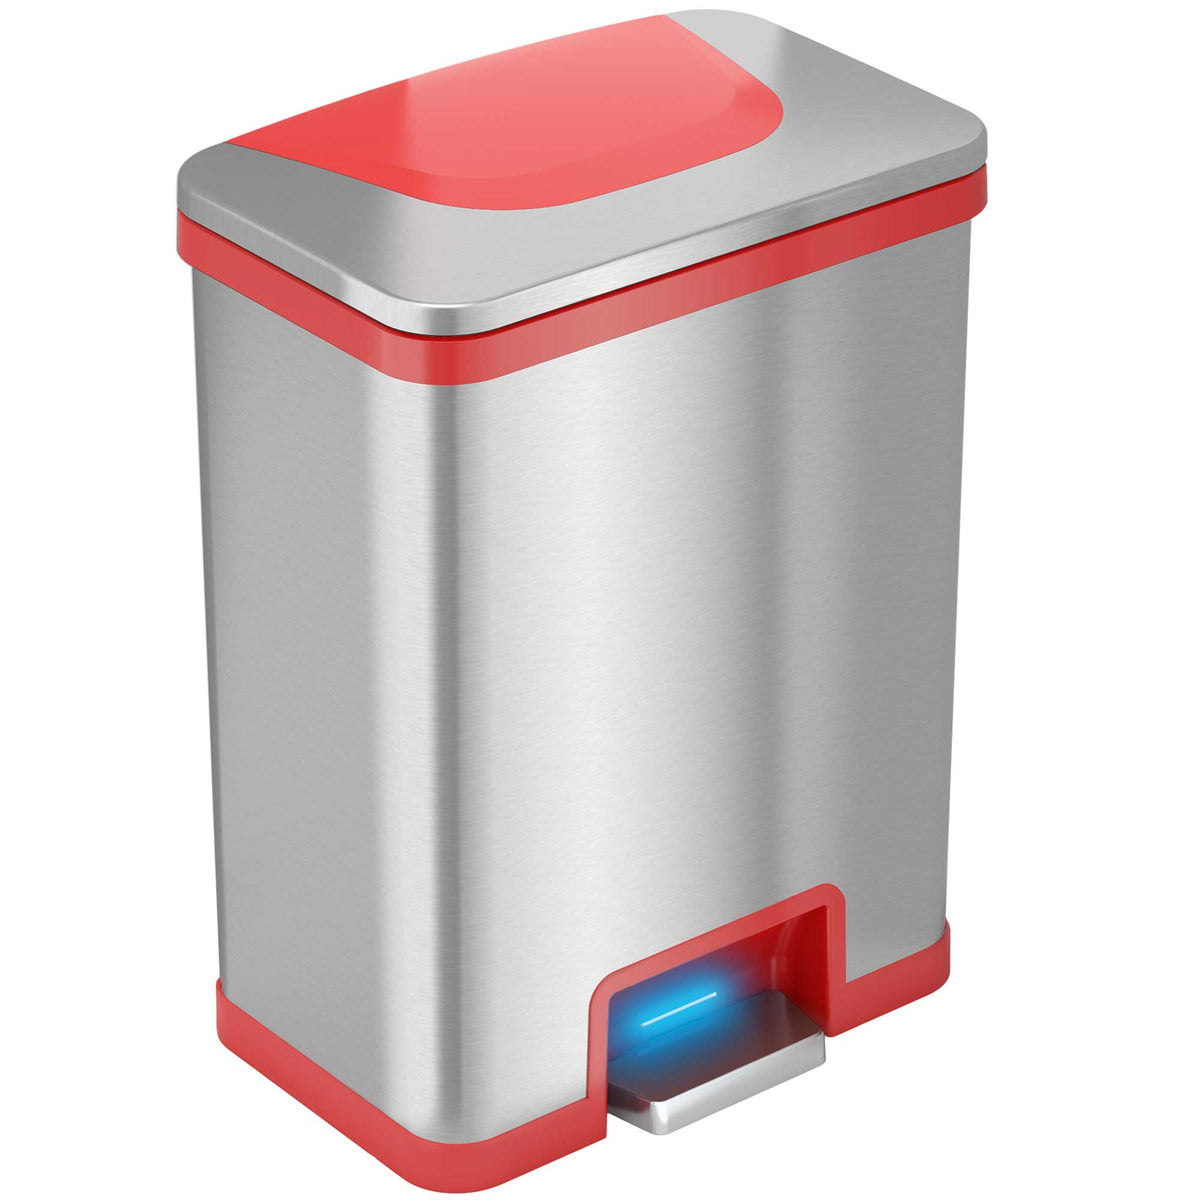 13 Gallon AutoStep Stainless Steel Pedal Sensor Trash Can (Red Trim) with Odor Filter